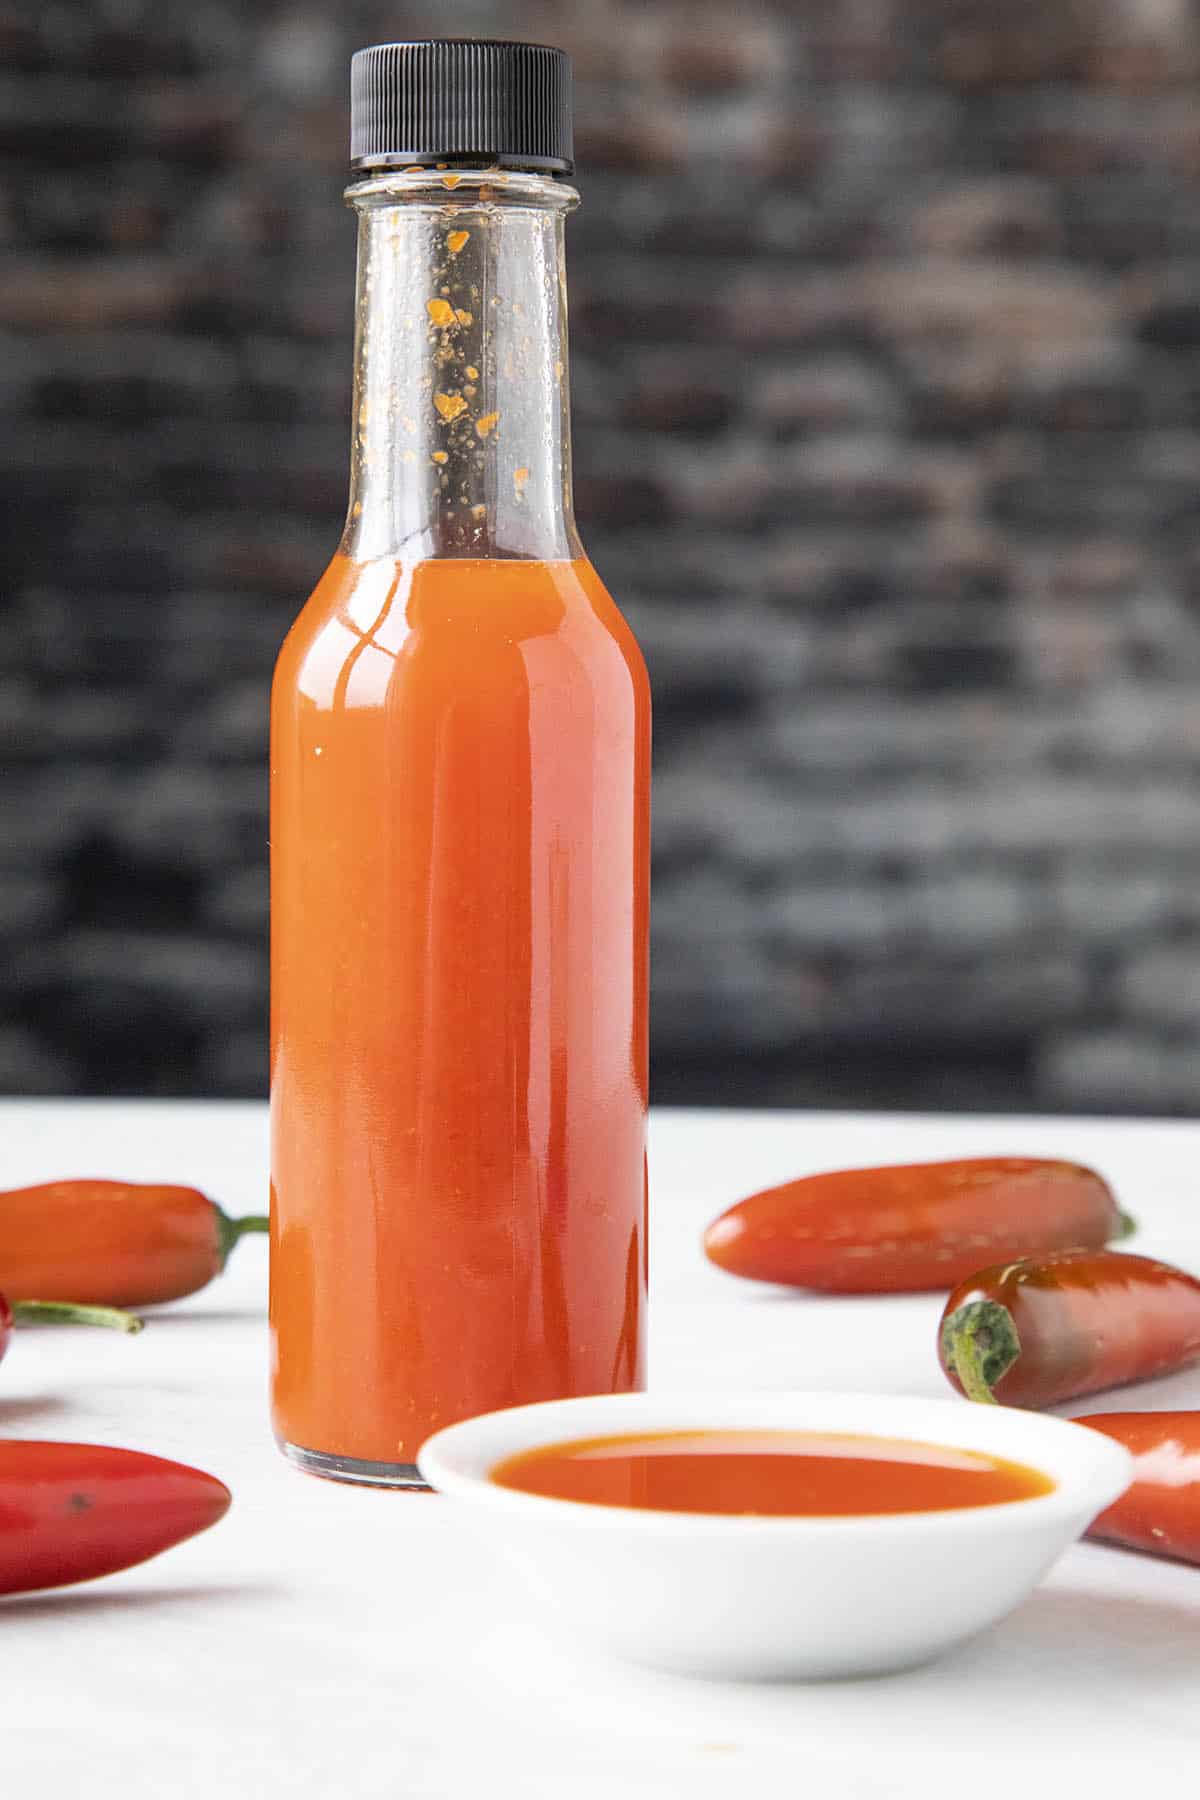 A bottle of Red Serrano Hot Sauce next to a small bowl of the hot sauce